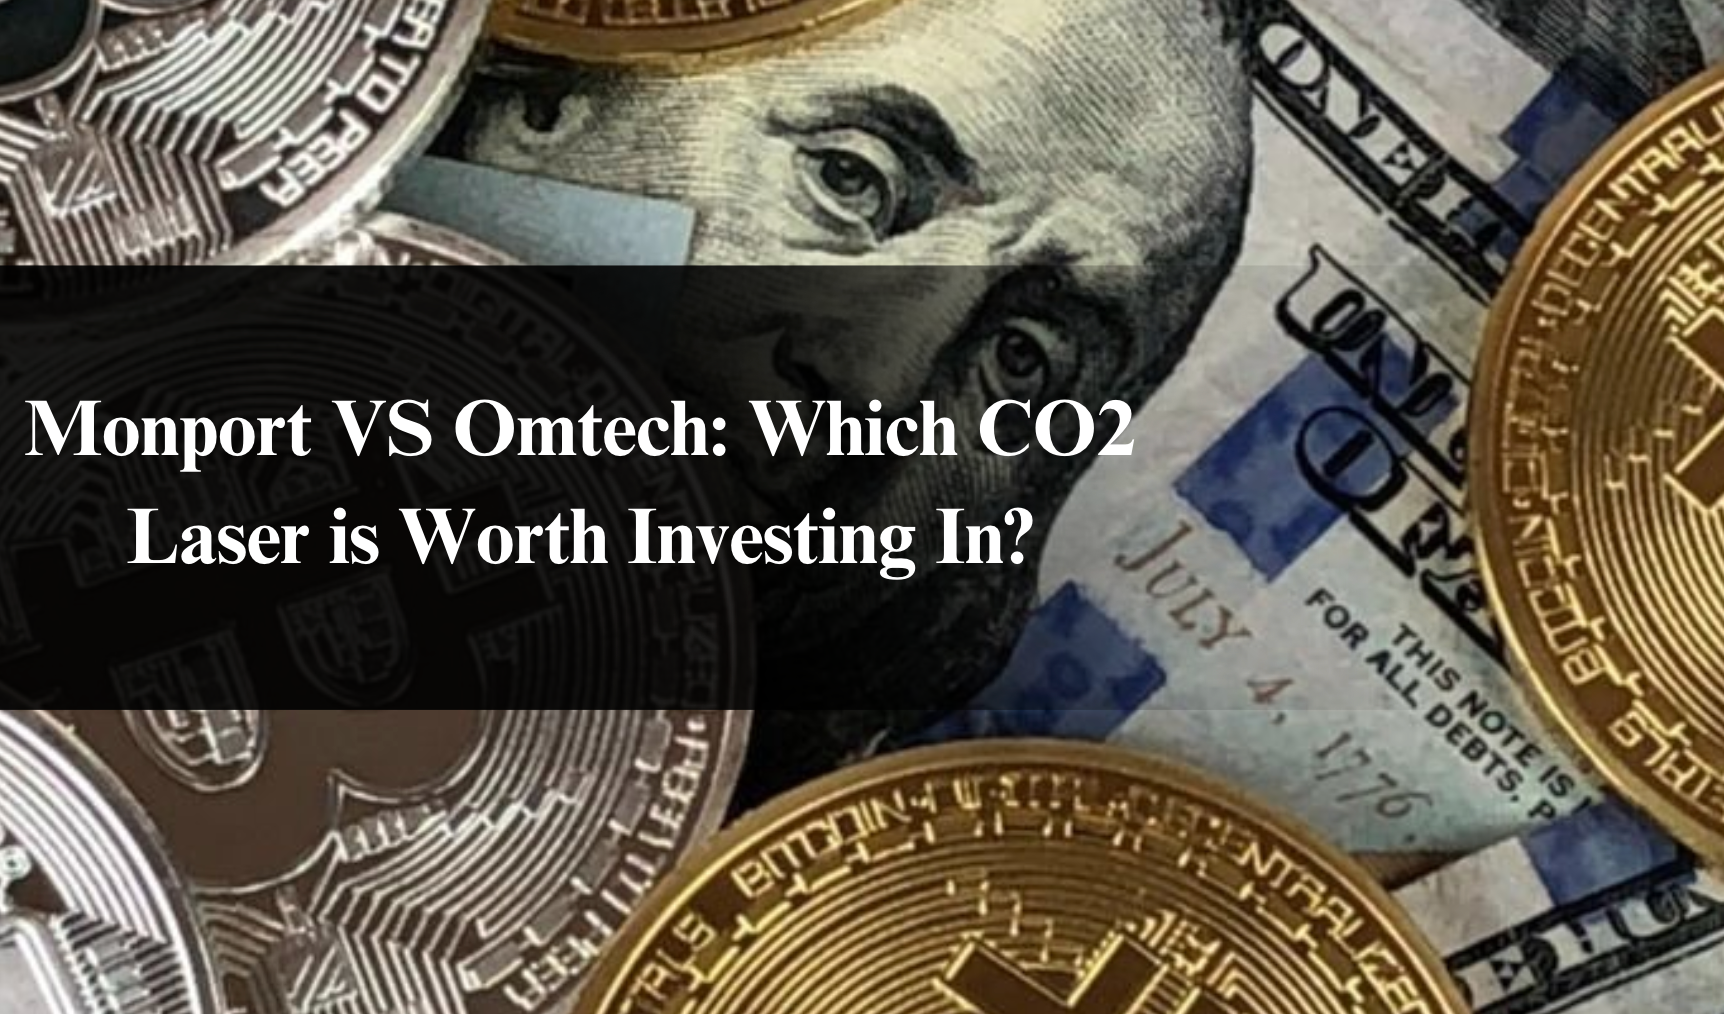 Monport VS Omtech: Which CO2 Laser is Worth Investing In?